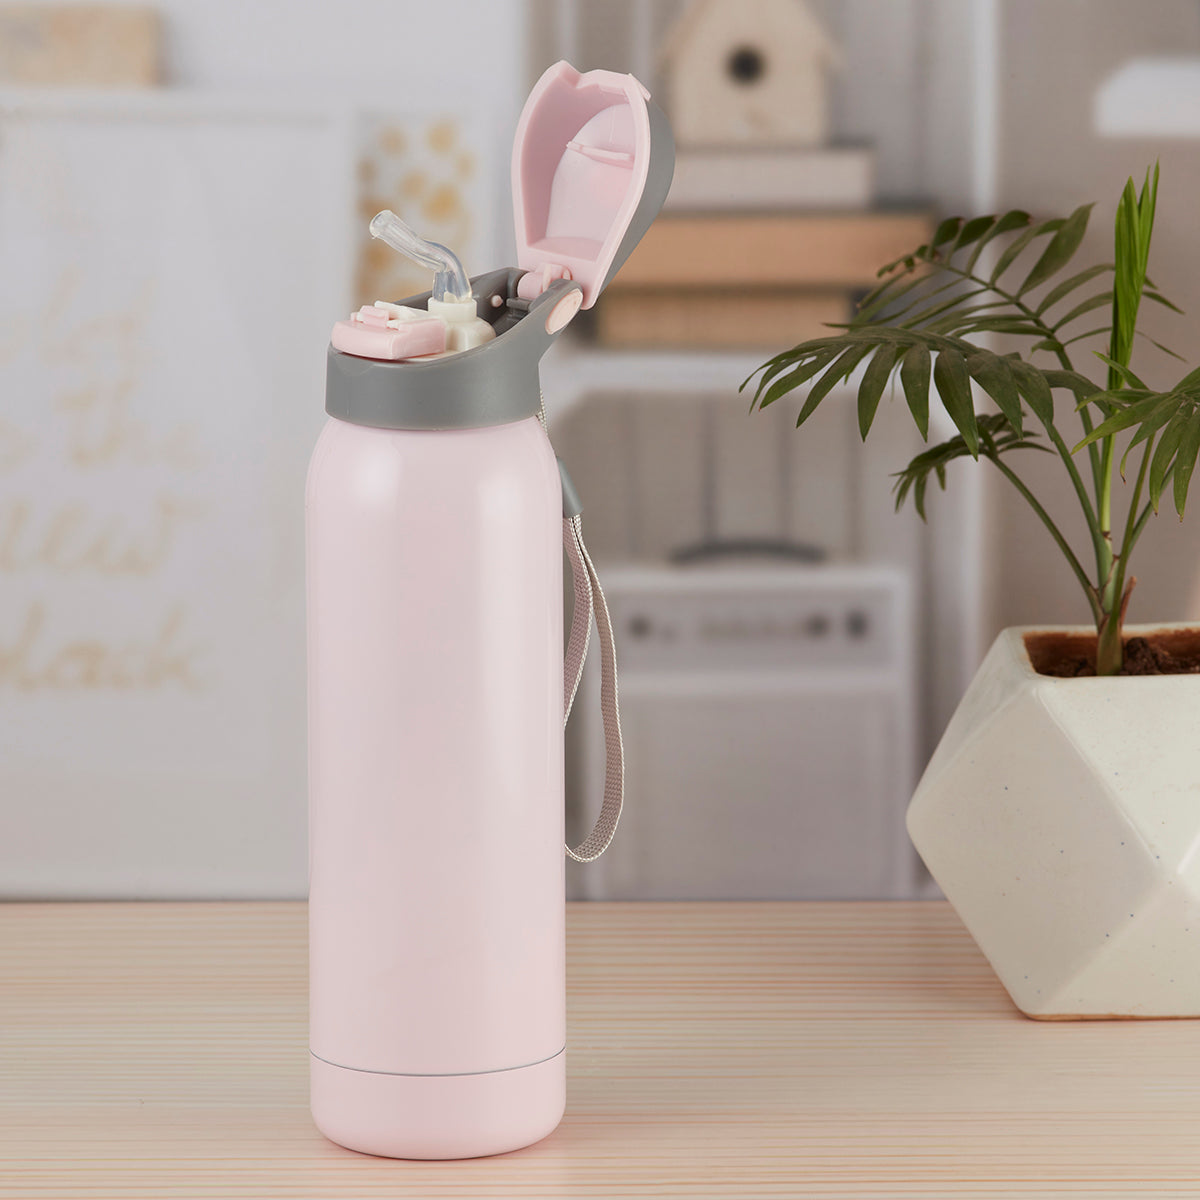 Stainless Steel Vacuum Insulated double wall Water Bottle for Home, Office, Travel and Sports, Leak - proof Lid for Hot and Cold liquids - 500ml (7362)